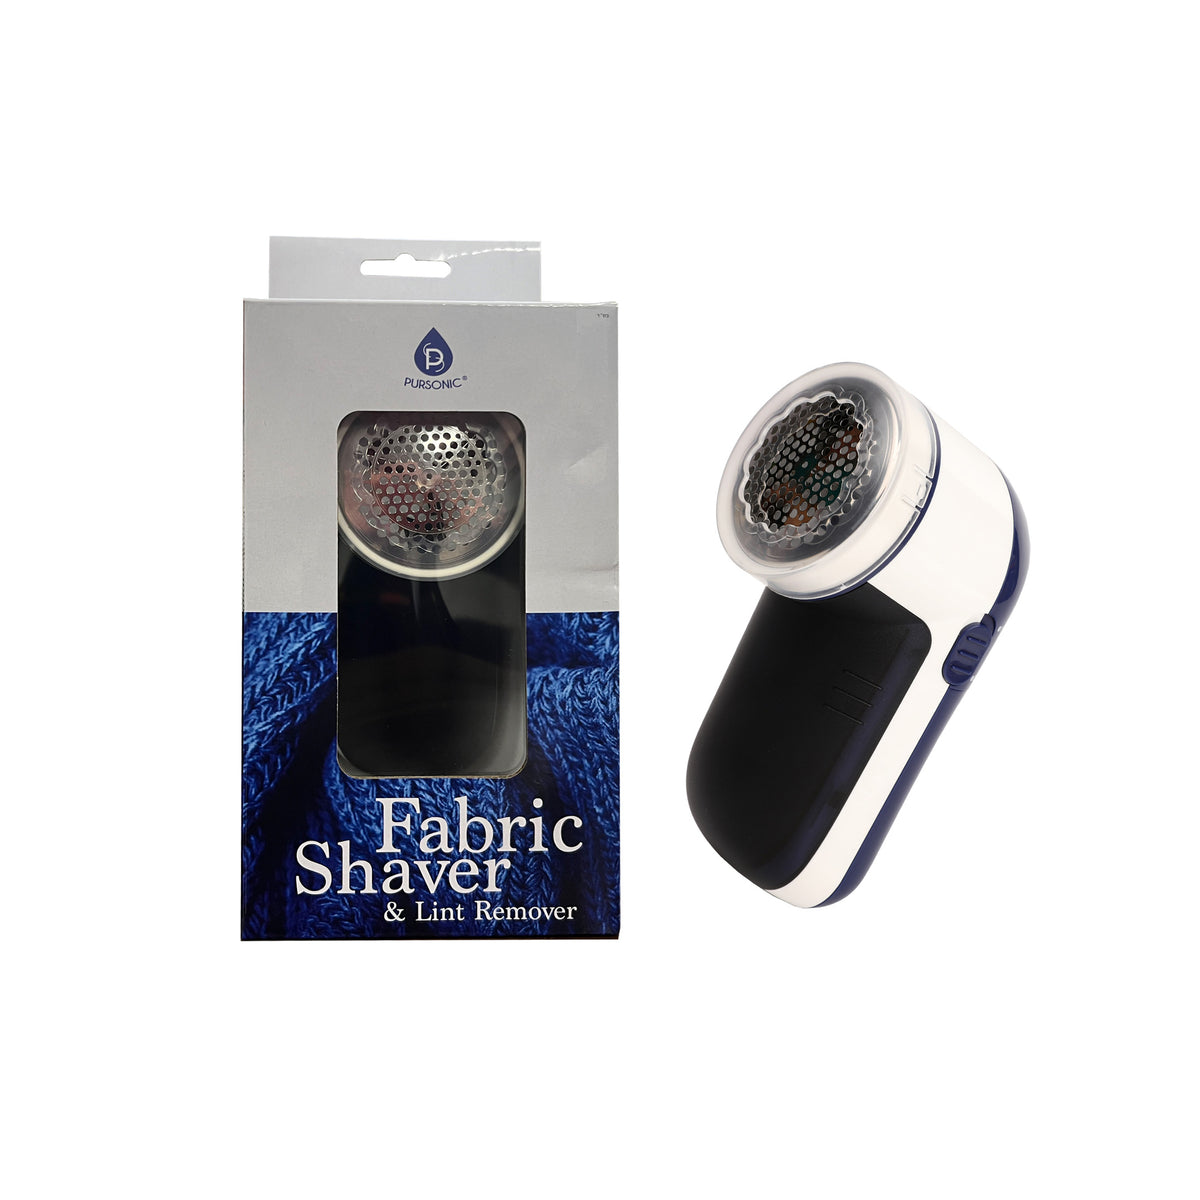 Fabric Shaver & Lint Remover with Cleaning Brush – Pursonic